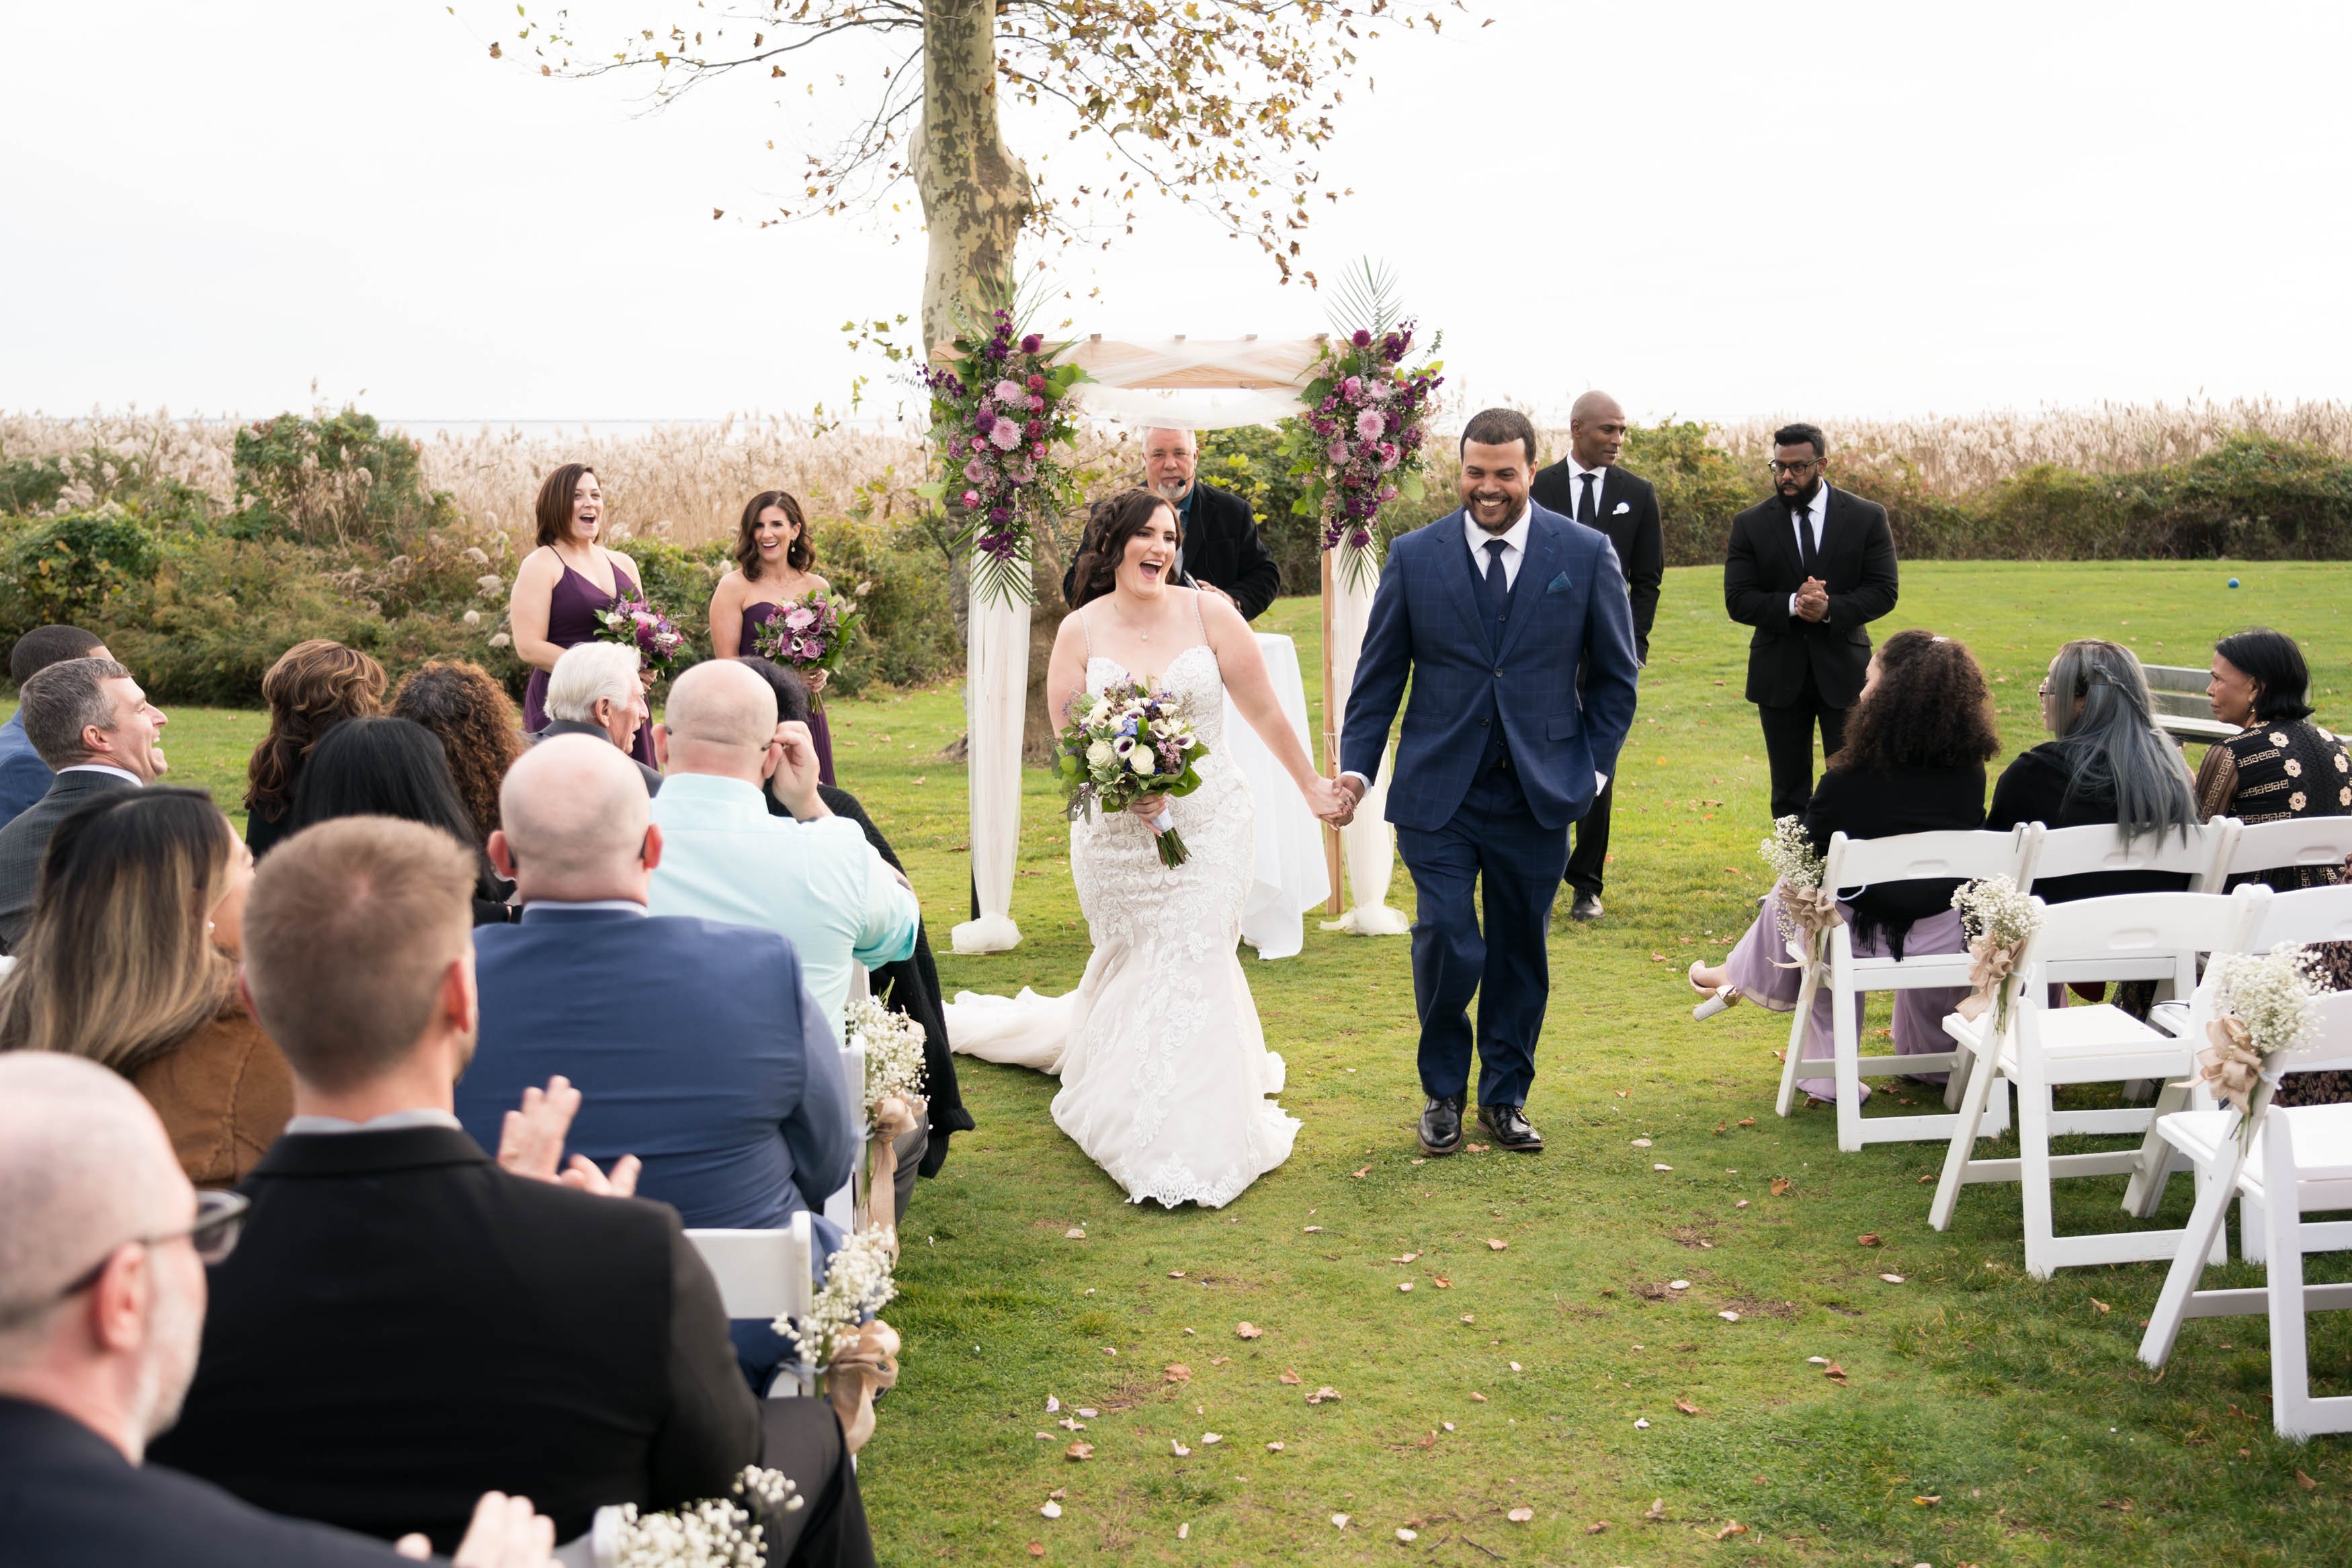 The Mansion at West Sayville - Outdoor Ceremony - Real Wedding Photos